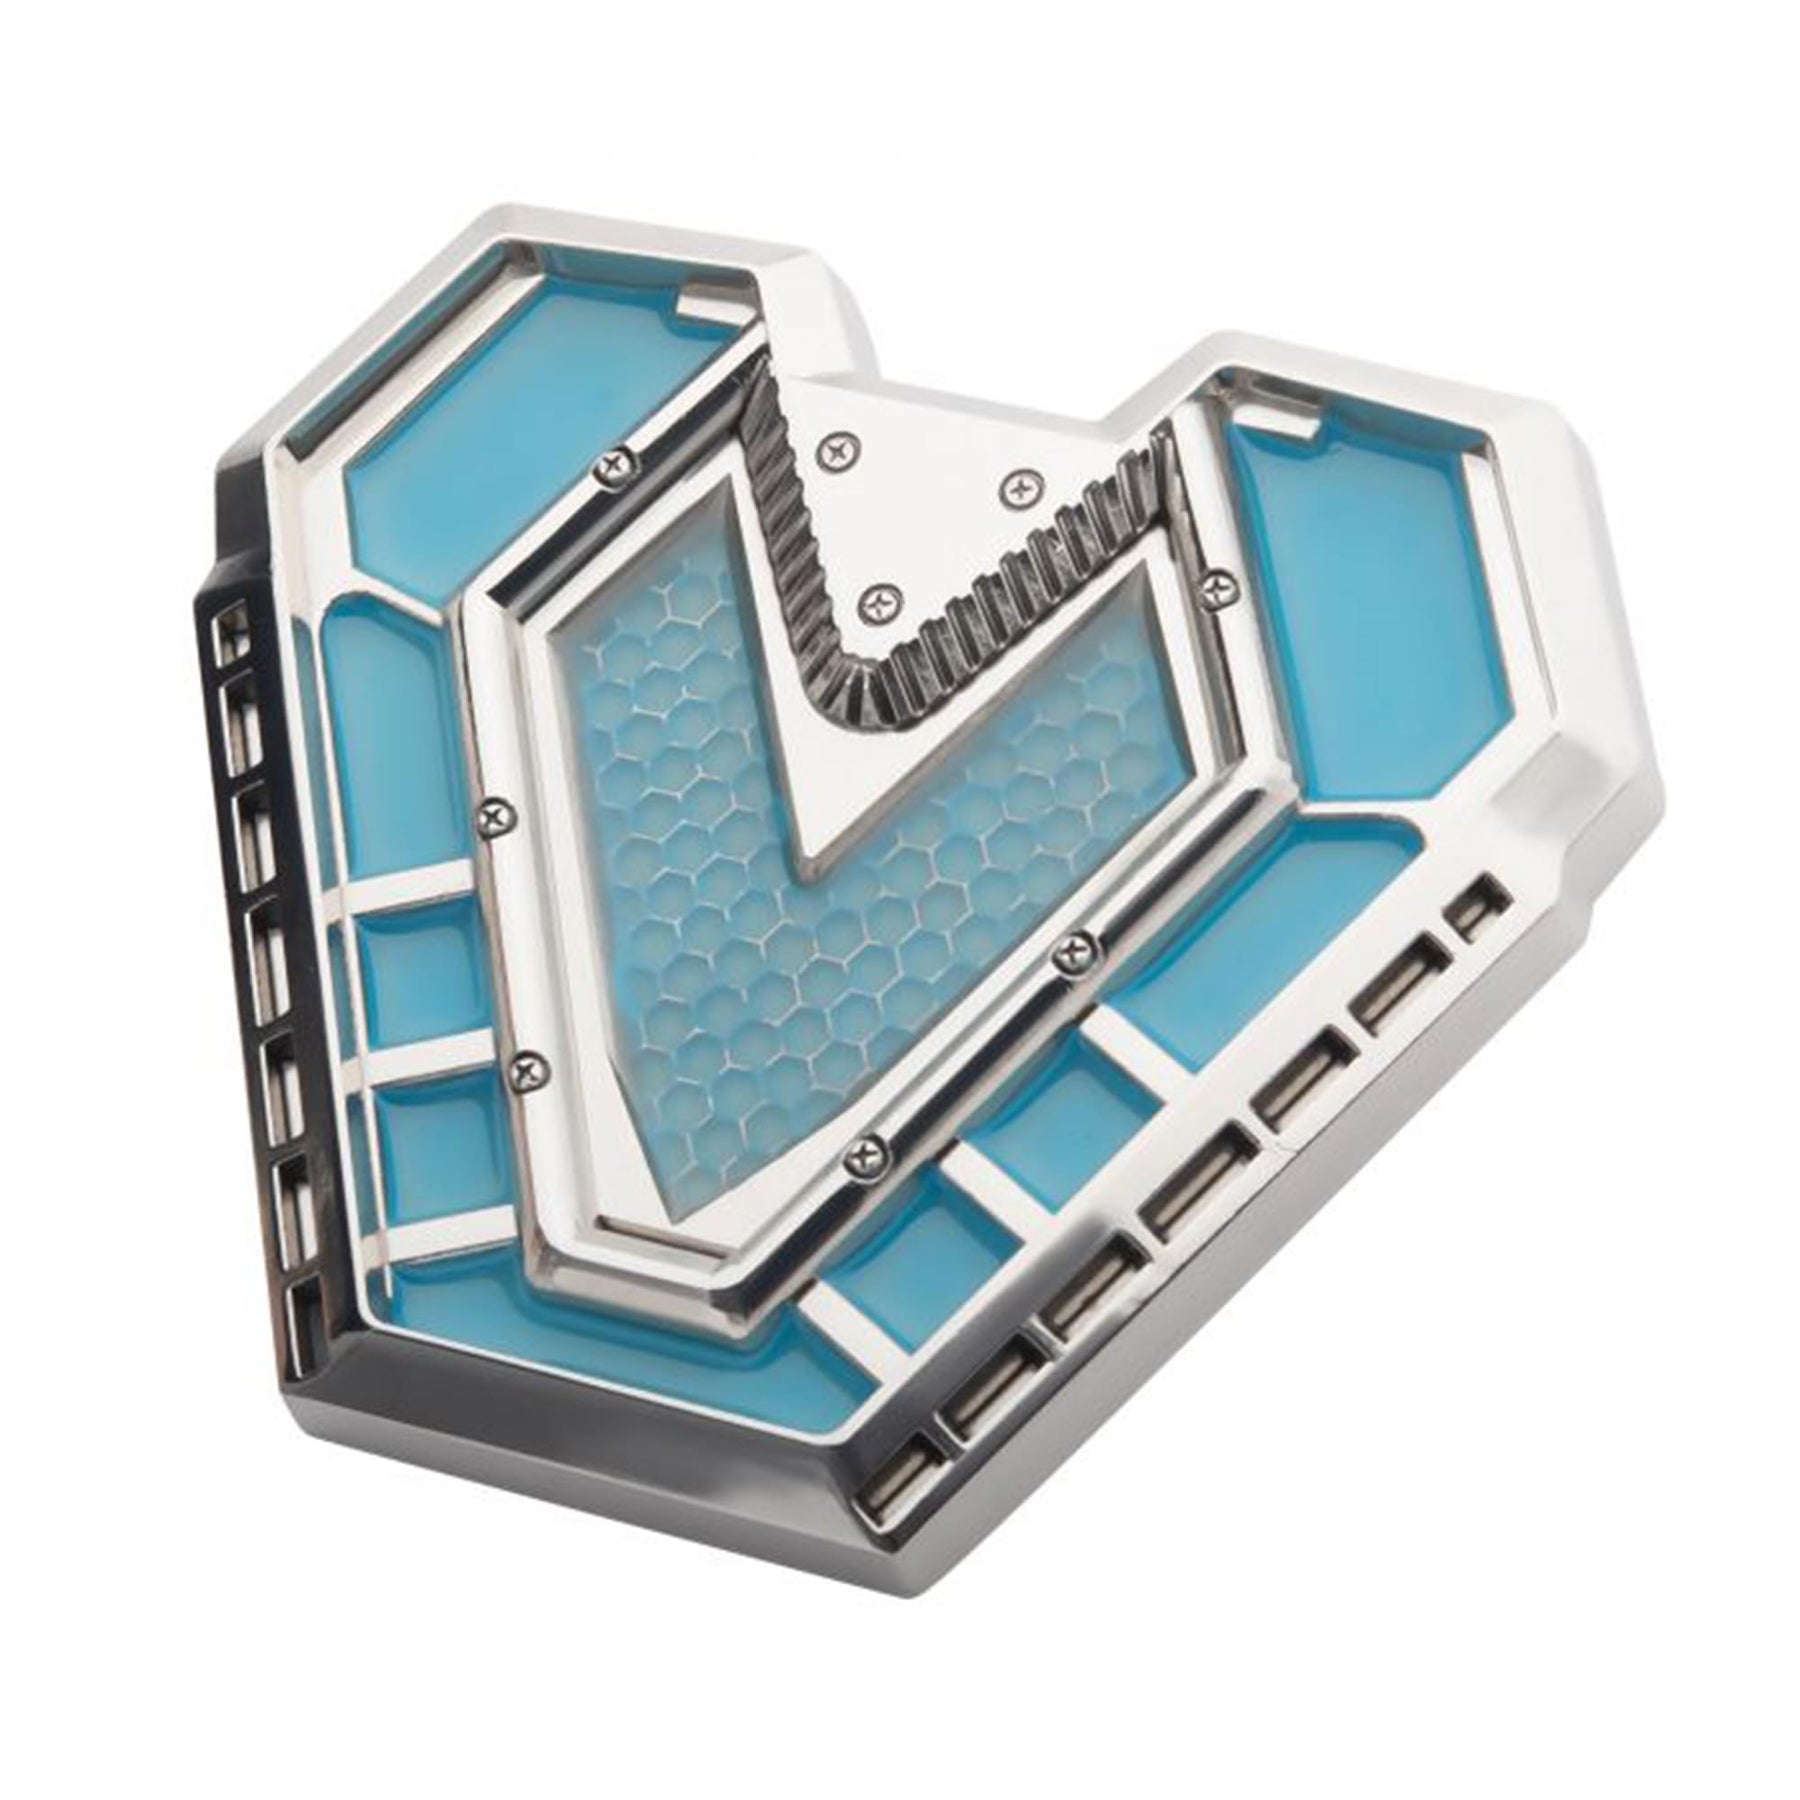 Marvel Black Panther: Wakanda Forever Iron Heart Arc Reactor Magnetic Pin